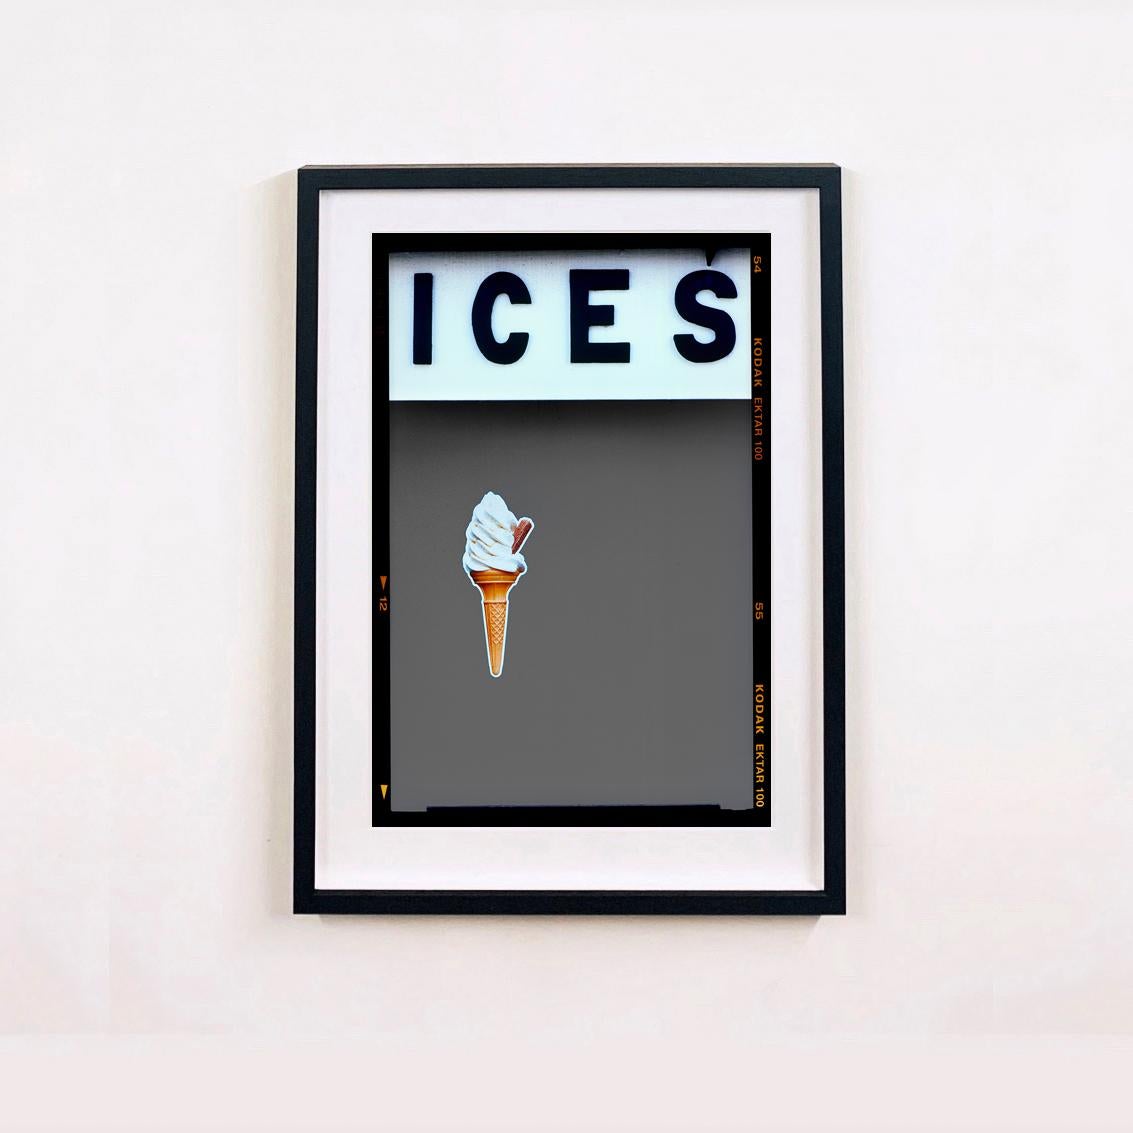 Ices (Grey), Bexhill-on-Sea - British seaside color photography - Print by Richard Heeps